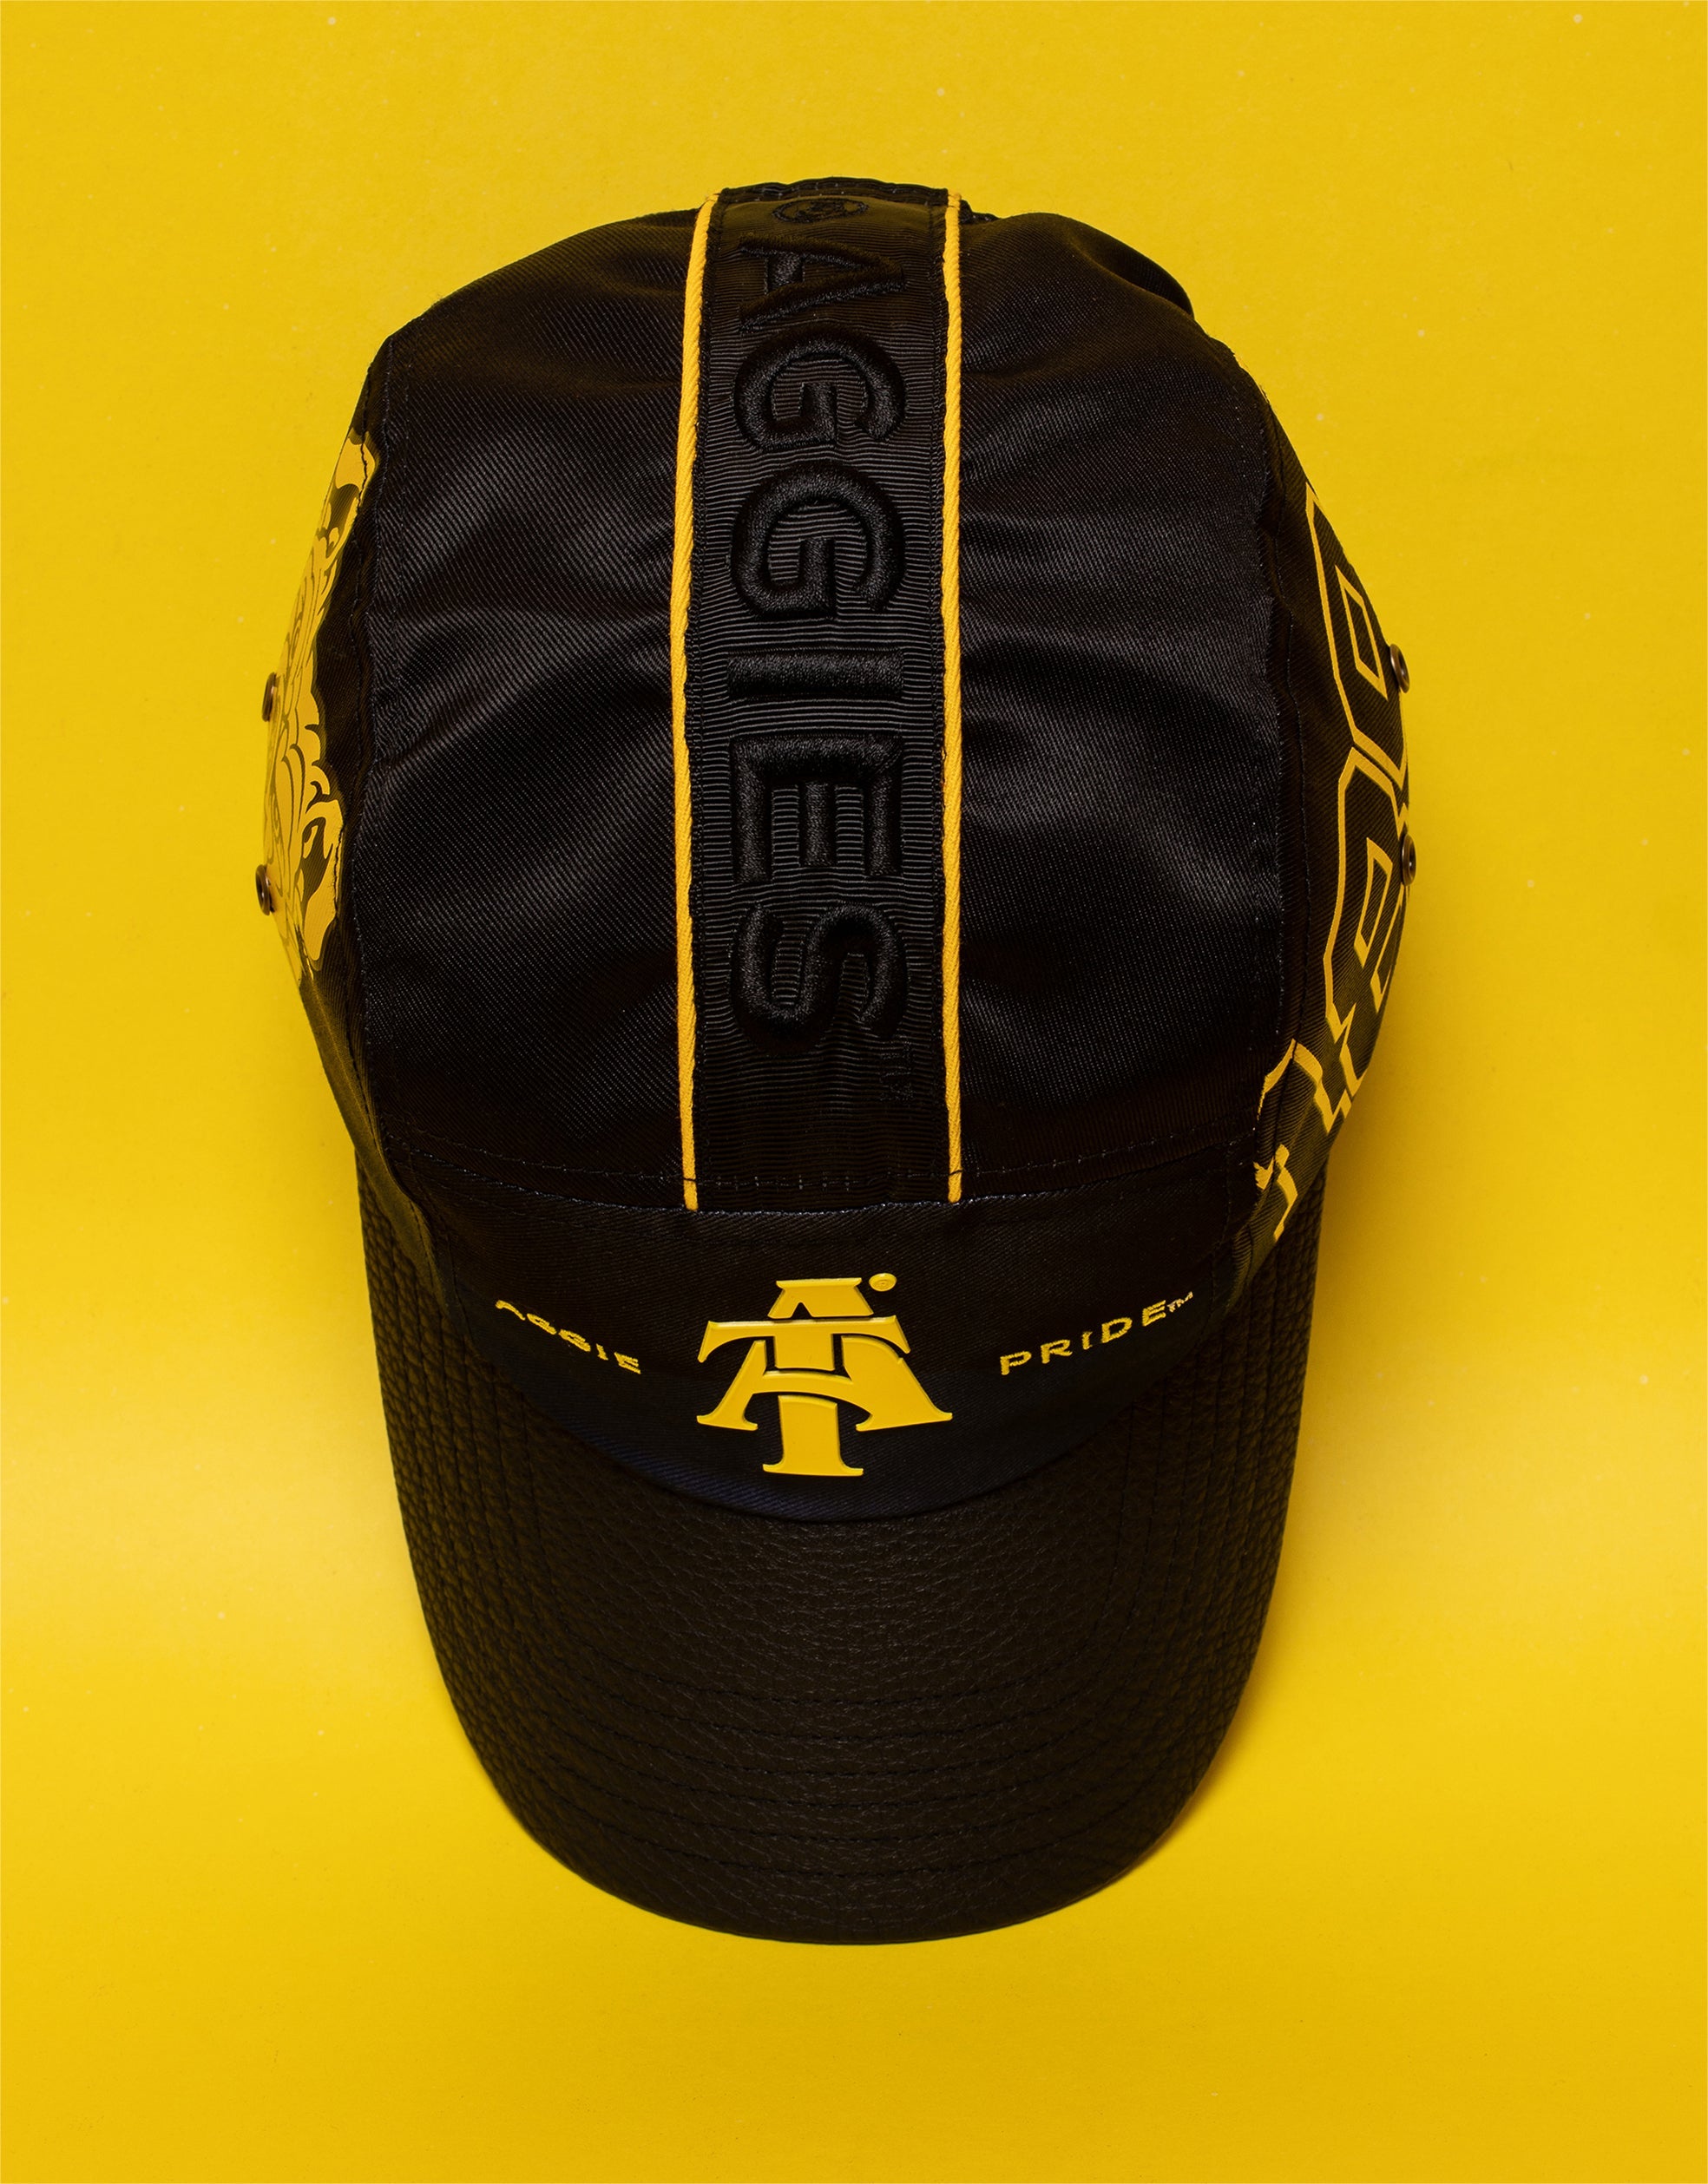 TheYard - BLACKOUT - North Carolina Agricultural &amp; Technical - HBCU Hat